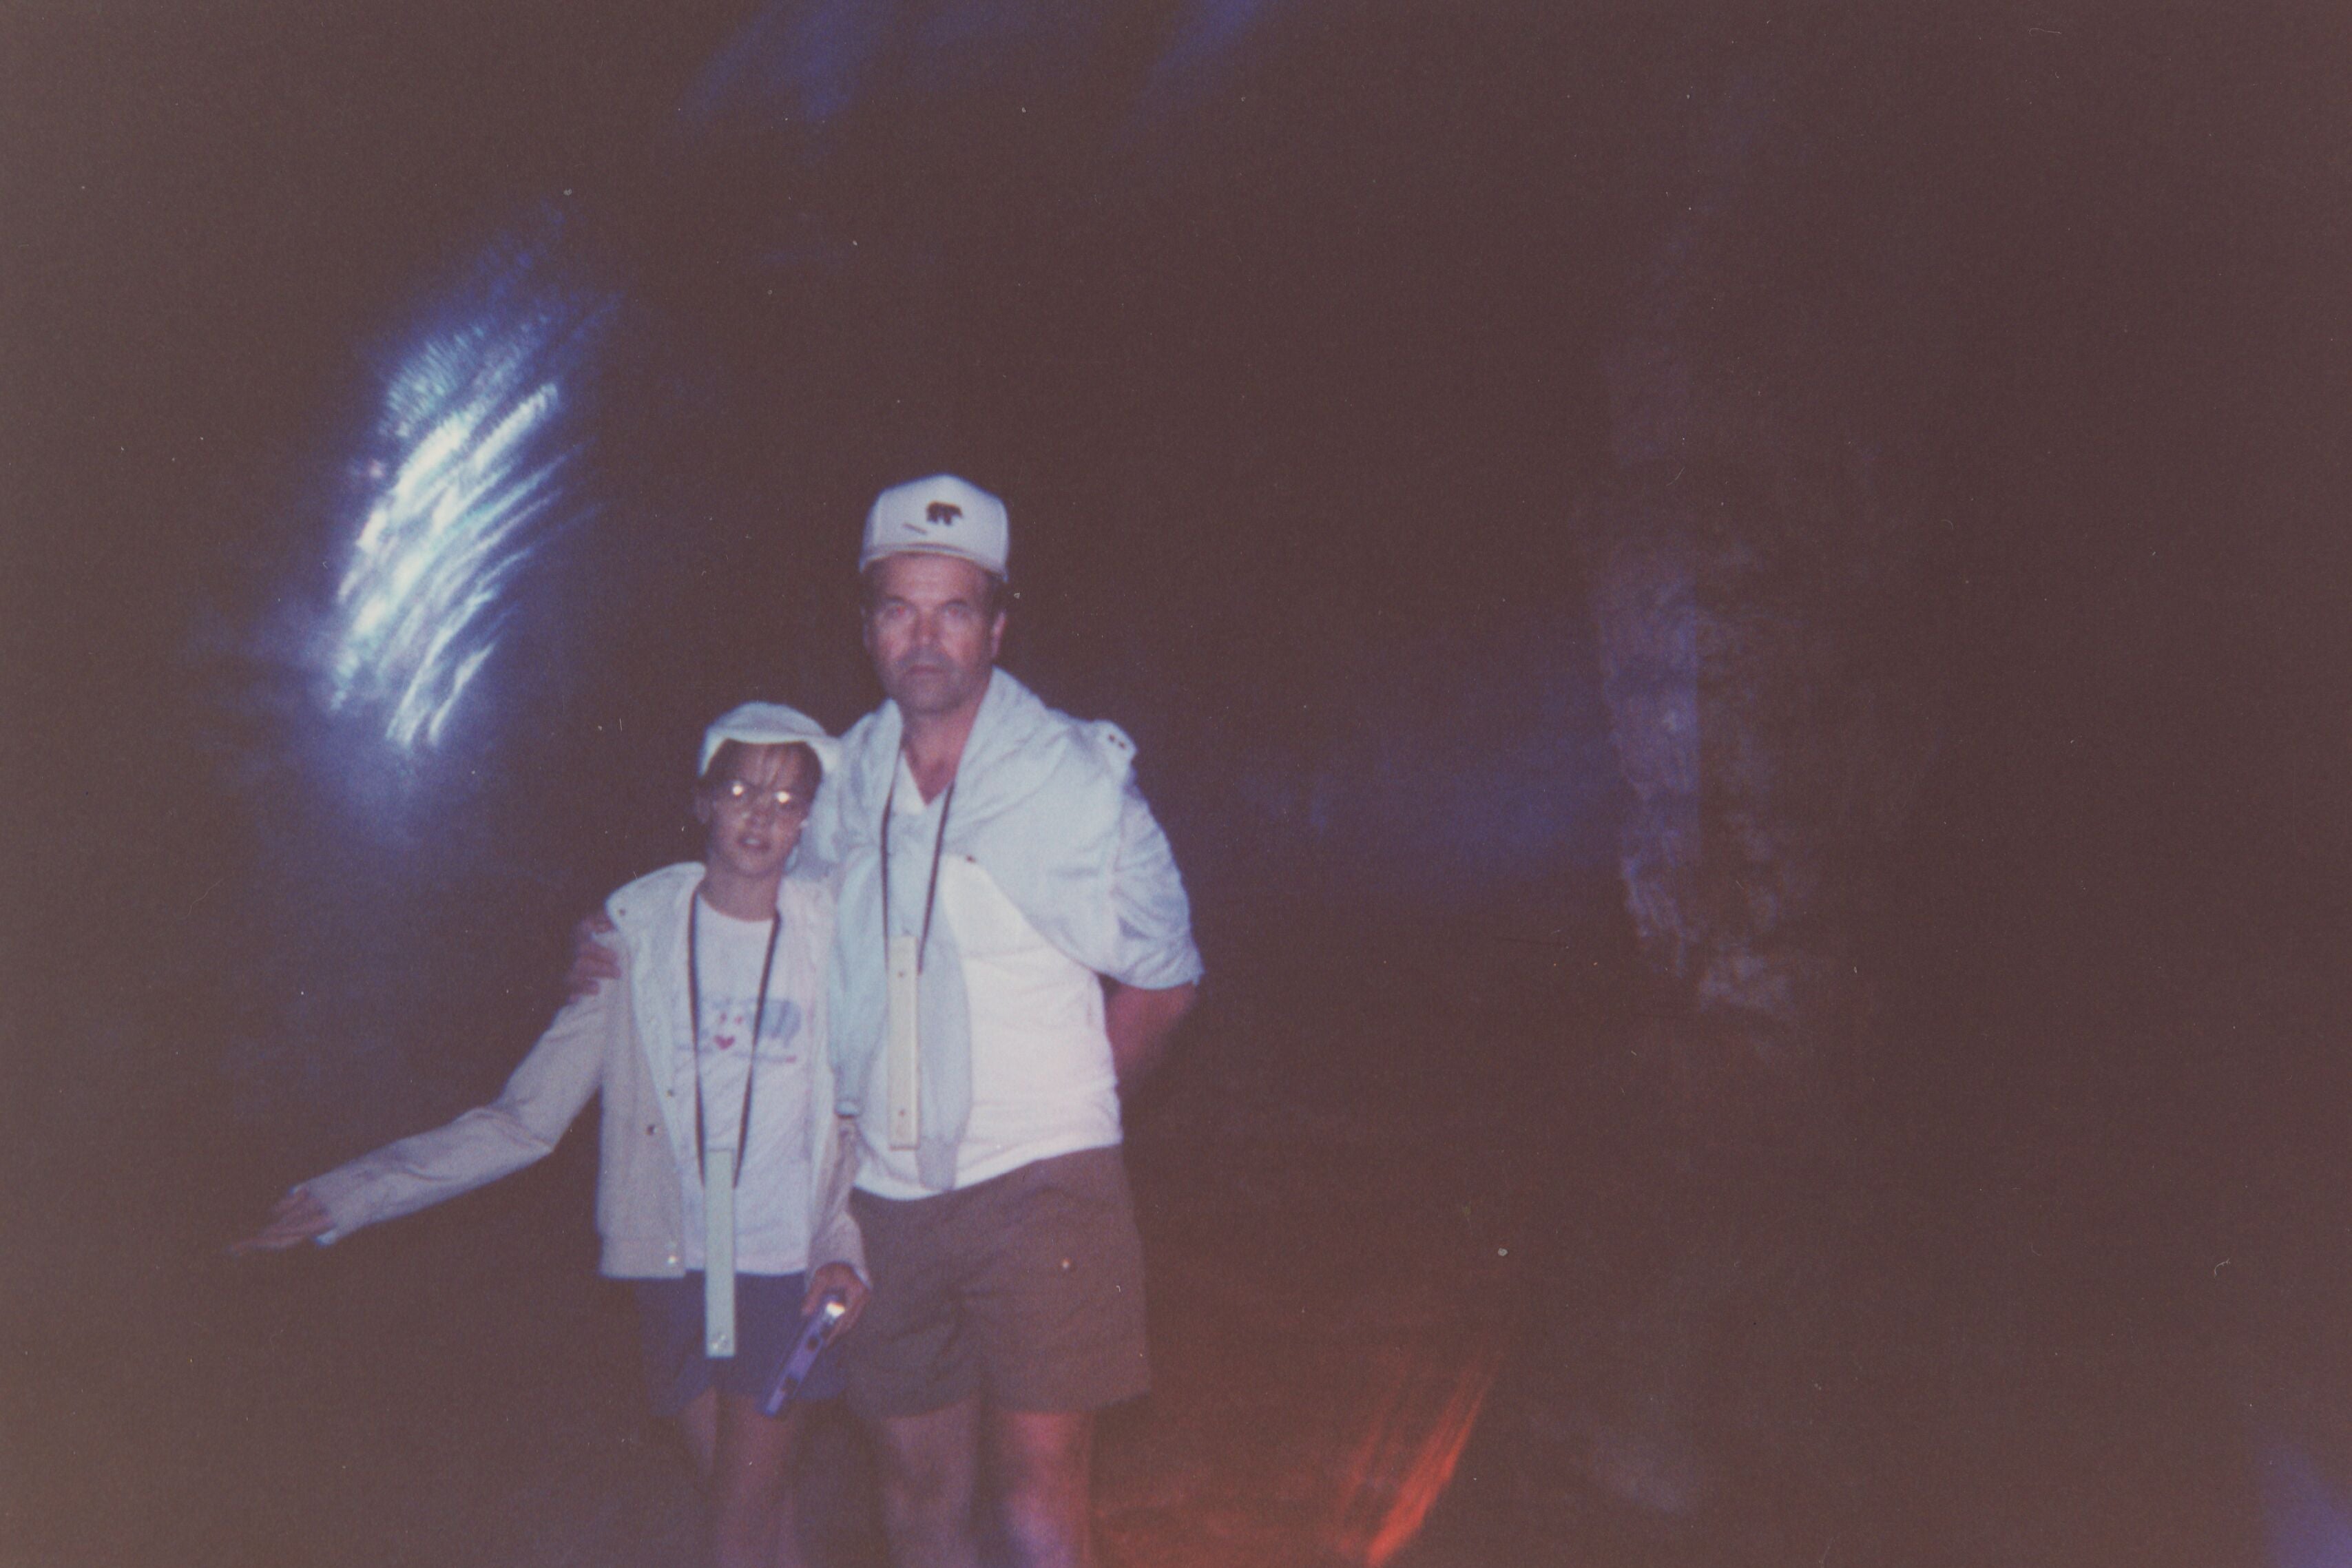 Kerri Rawson and her father in a dark space with a spectral burst of light hovering next to their heads.